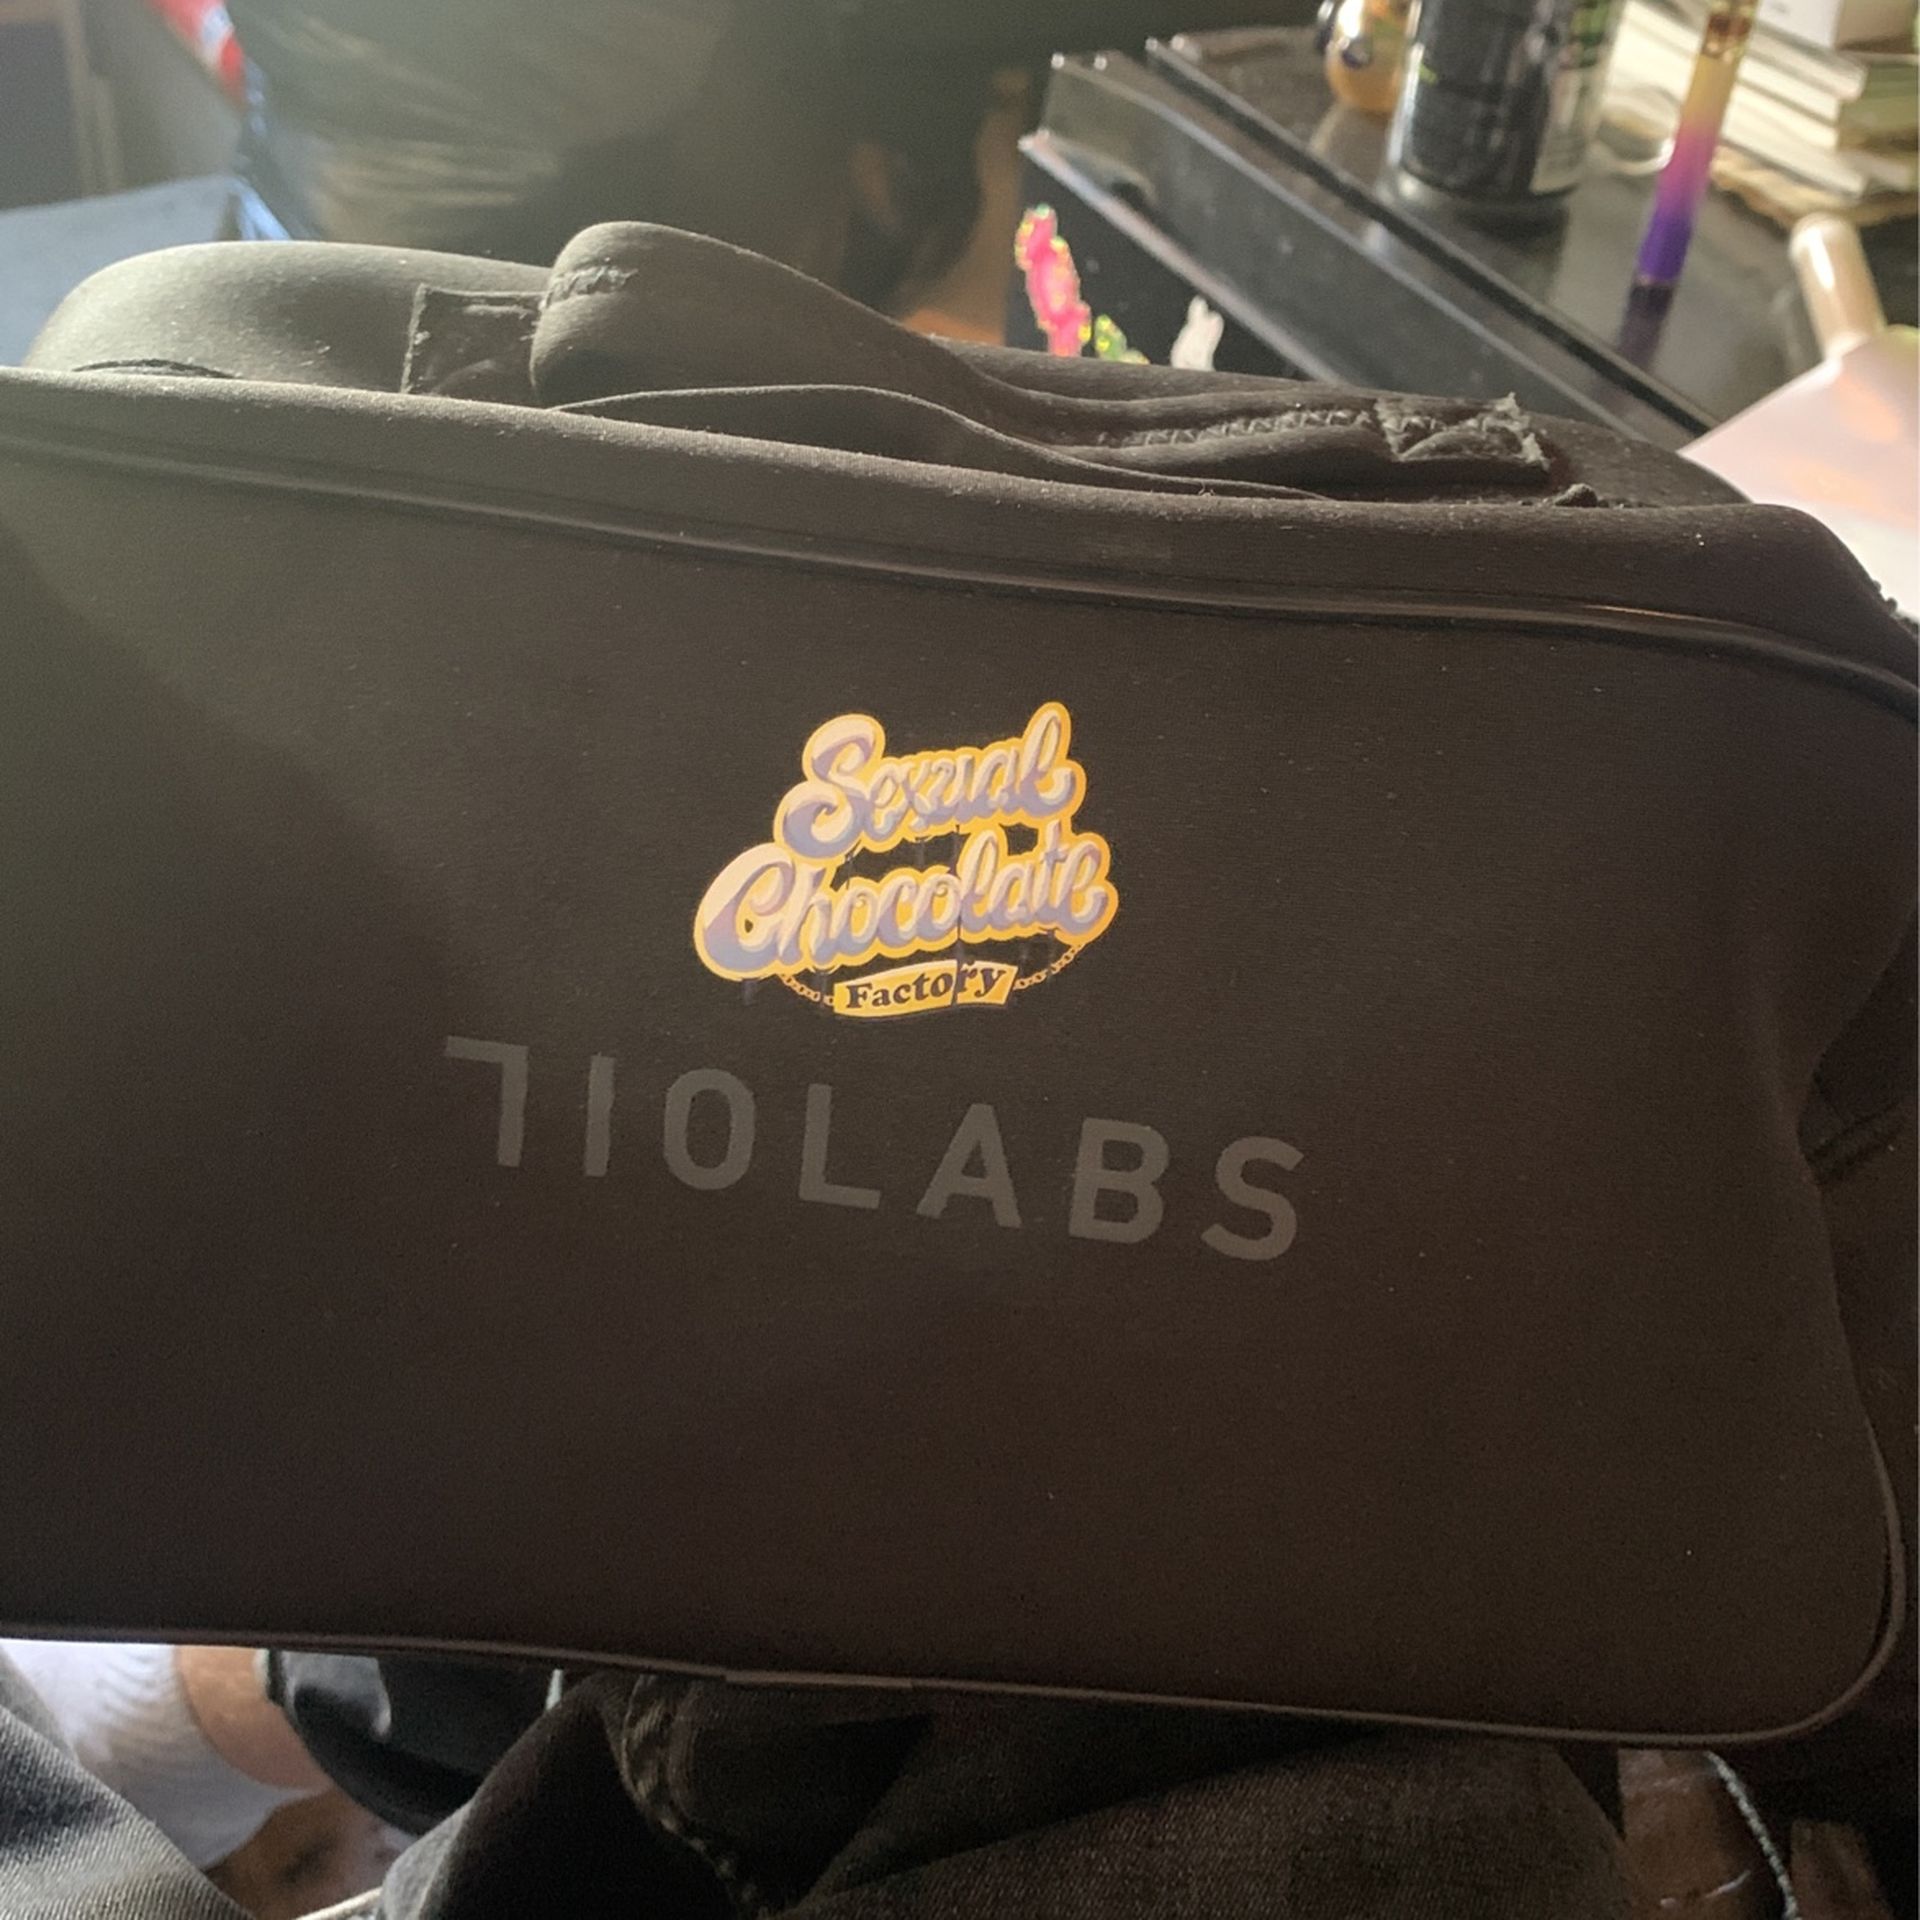 710 Labs Bag for Sale in Pleasanton, CA - OfferUp